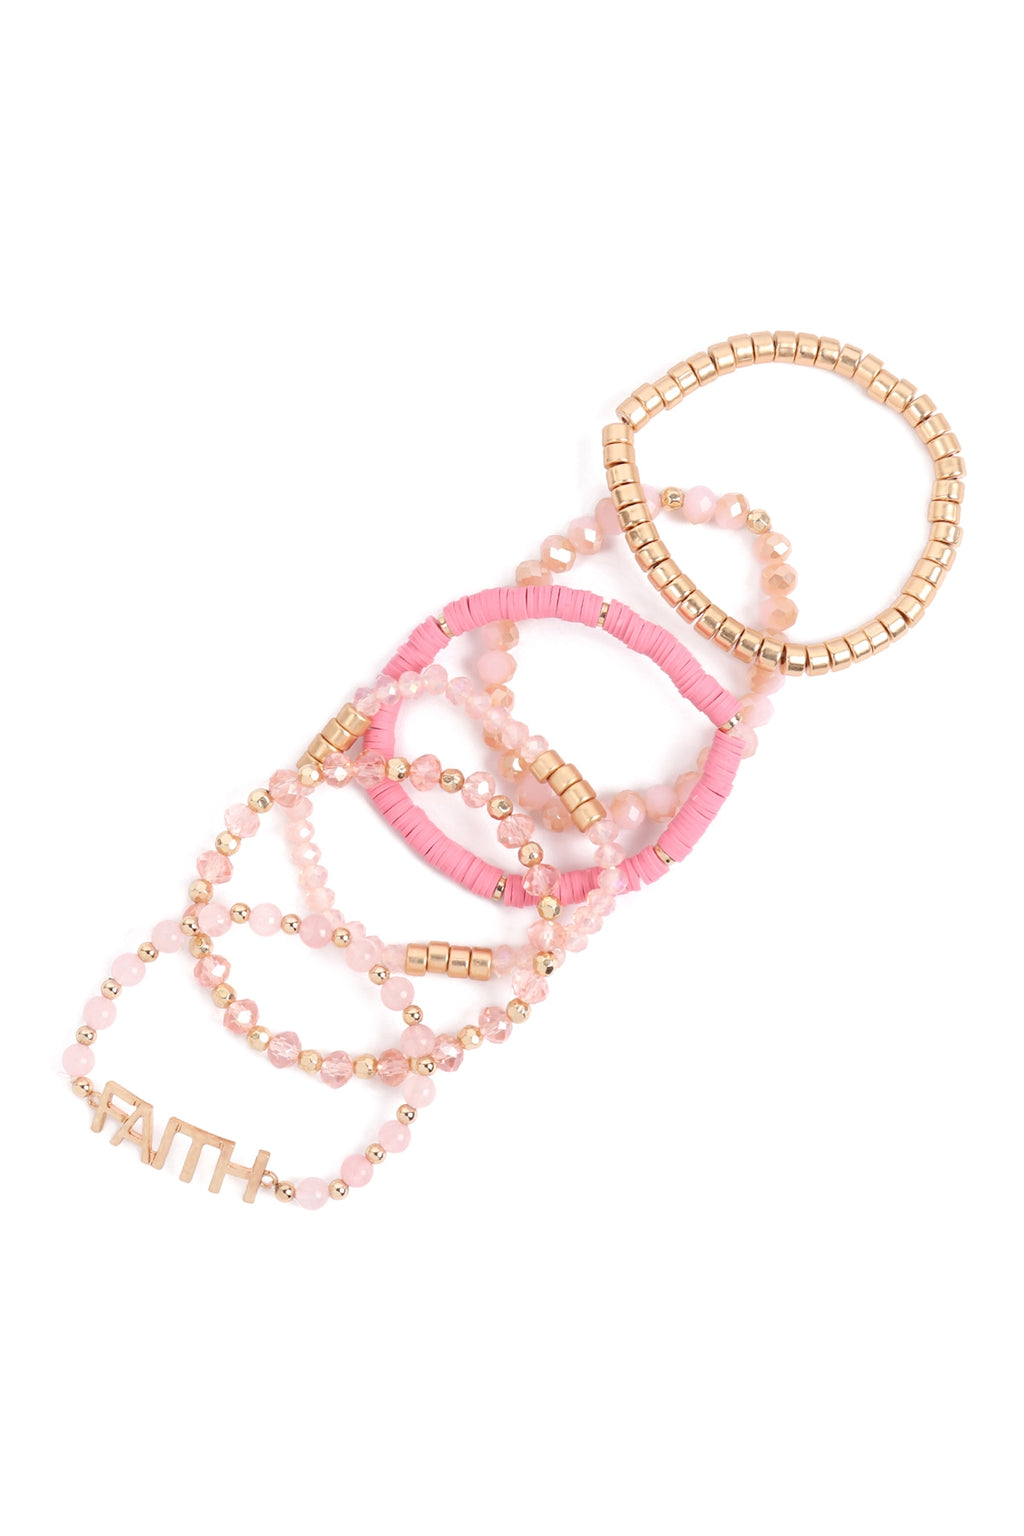 Mix Beads Faith Charm Bracelet Pink - Pack of 6